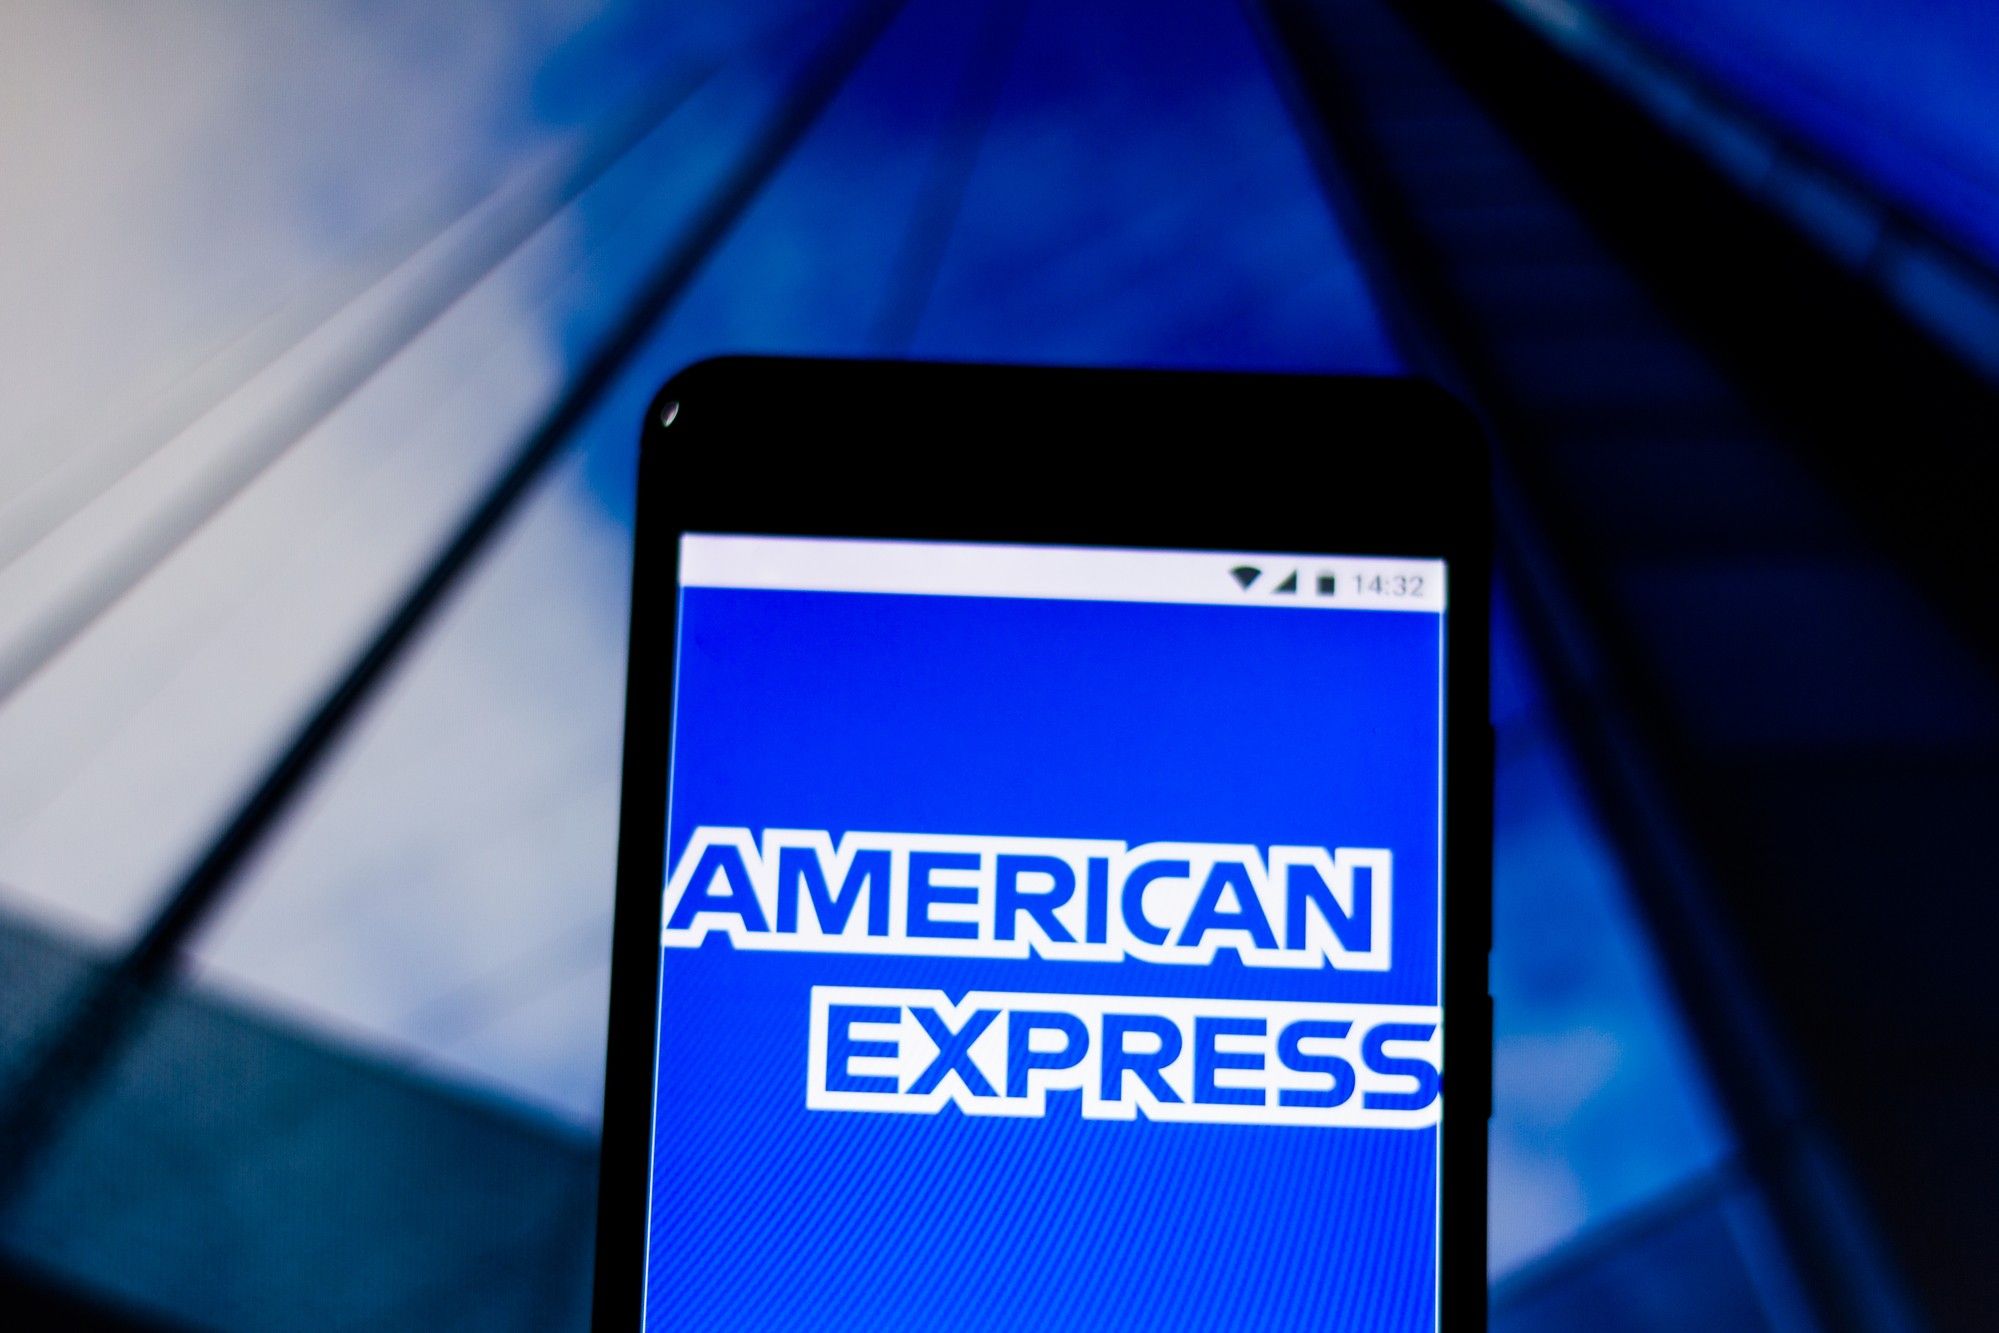 American Express users recently took action against the company.